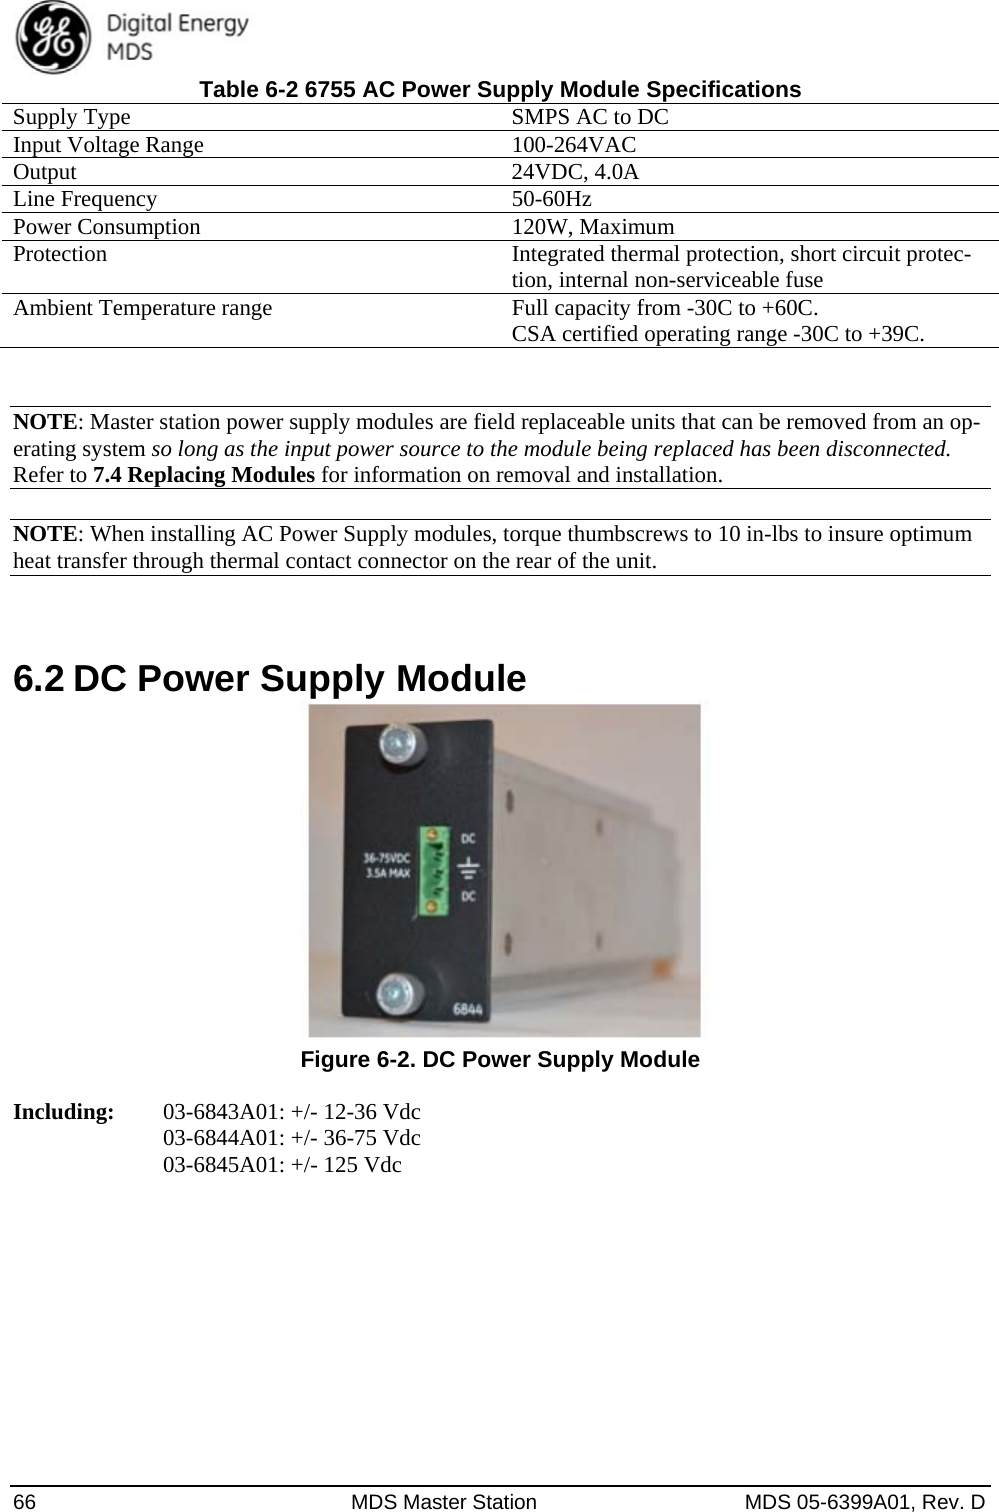  66  MDS Master Station  MDS 05-6399A01, Rev. D Table 6-2 6755 AC Power Supply Module Specifications Supply Type  SMPS AC to DC Input Voltage Range  100-264VAC Output 24VDC, 4.0A Line Frequency  50-60Hz Power Consumption  120W, Maximum Protection  Integrated thermal protection, short circuit protec-tion, internal non-serviceable fuse Ambient Temperature range  Full capacity from -30C to +60C.     CSA certified operating range -30C to +39C.  NOTE: Master station power supply modules are field replaceable units that can be removed from an op-erating system so long as the input power source to the module being replaced has been disconnected. Refer to 7.4 Replacing Modules for information on removal and installation.  NOTE: When installing AC Power Supply modules, torque thumbscrews to 10 in-lbs to insure optimum heat transfer through thermal contact connector on the rear of the unit.  6.2 DC Power Supply Module   Figure 6-2. DC Power Supply Module  Including:   03-6843A01: +/- 12-36 Vdc     03-6844A01: +/- 36-75 Vdc     03-6845A01: +/- 125 Vdc 